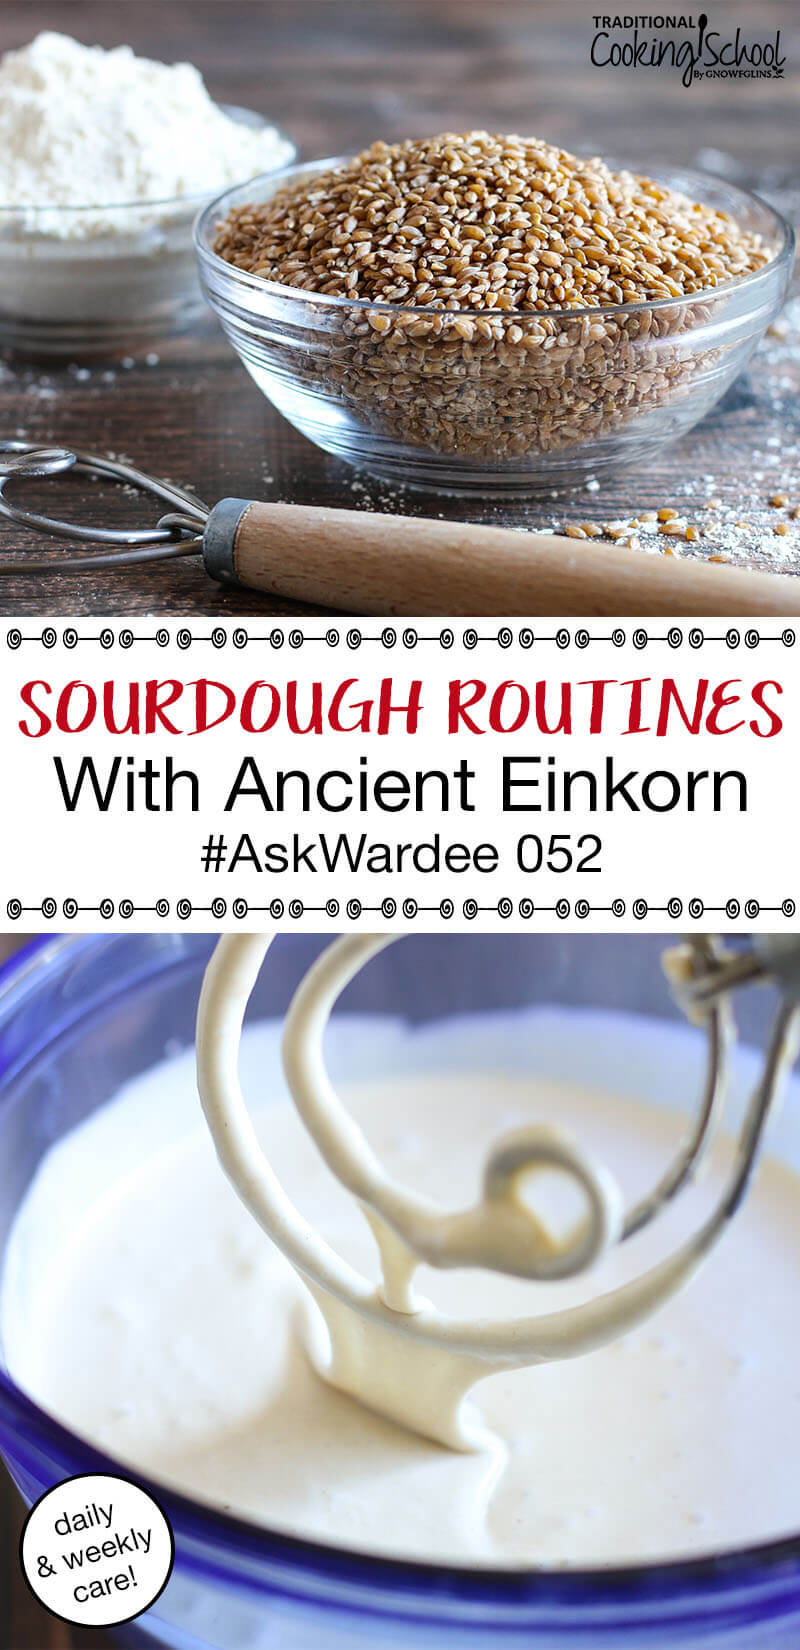 Since switching to ancient einkorn for baking, my sourdough routine has gone back and forth between daily and weekly care. Watch, listen, or read to learn about how my routine changes depending on the season and how we're eating. | AskWardee.tv